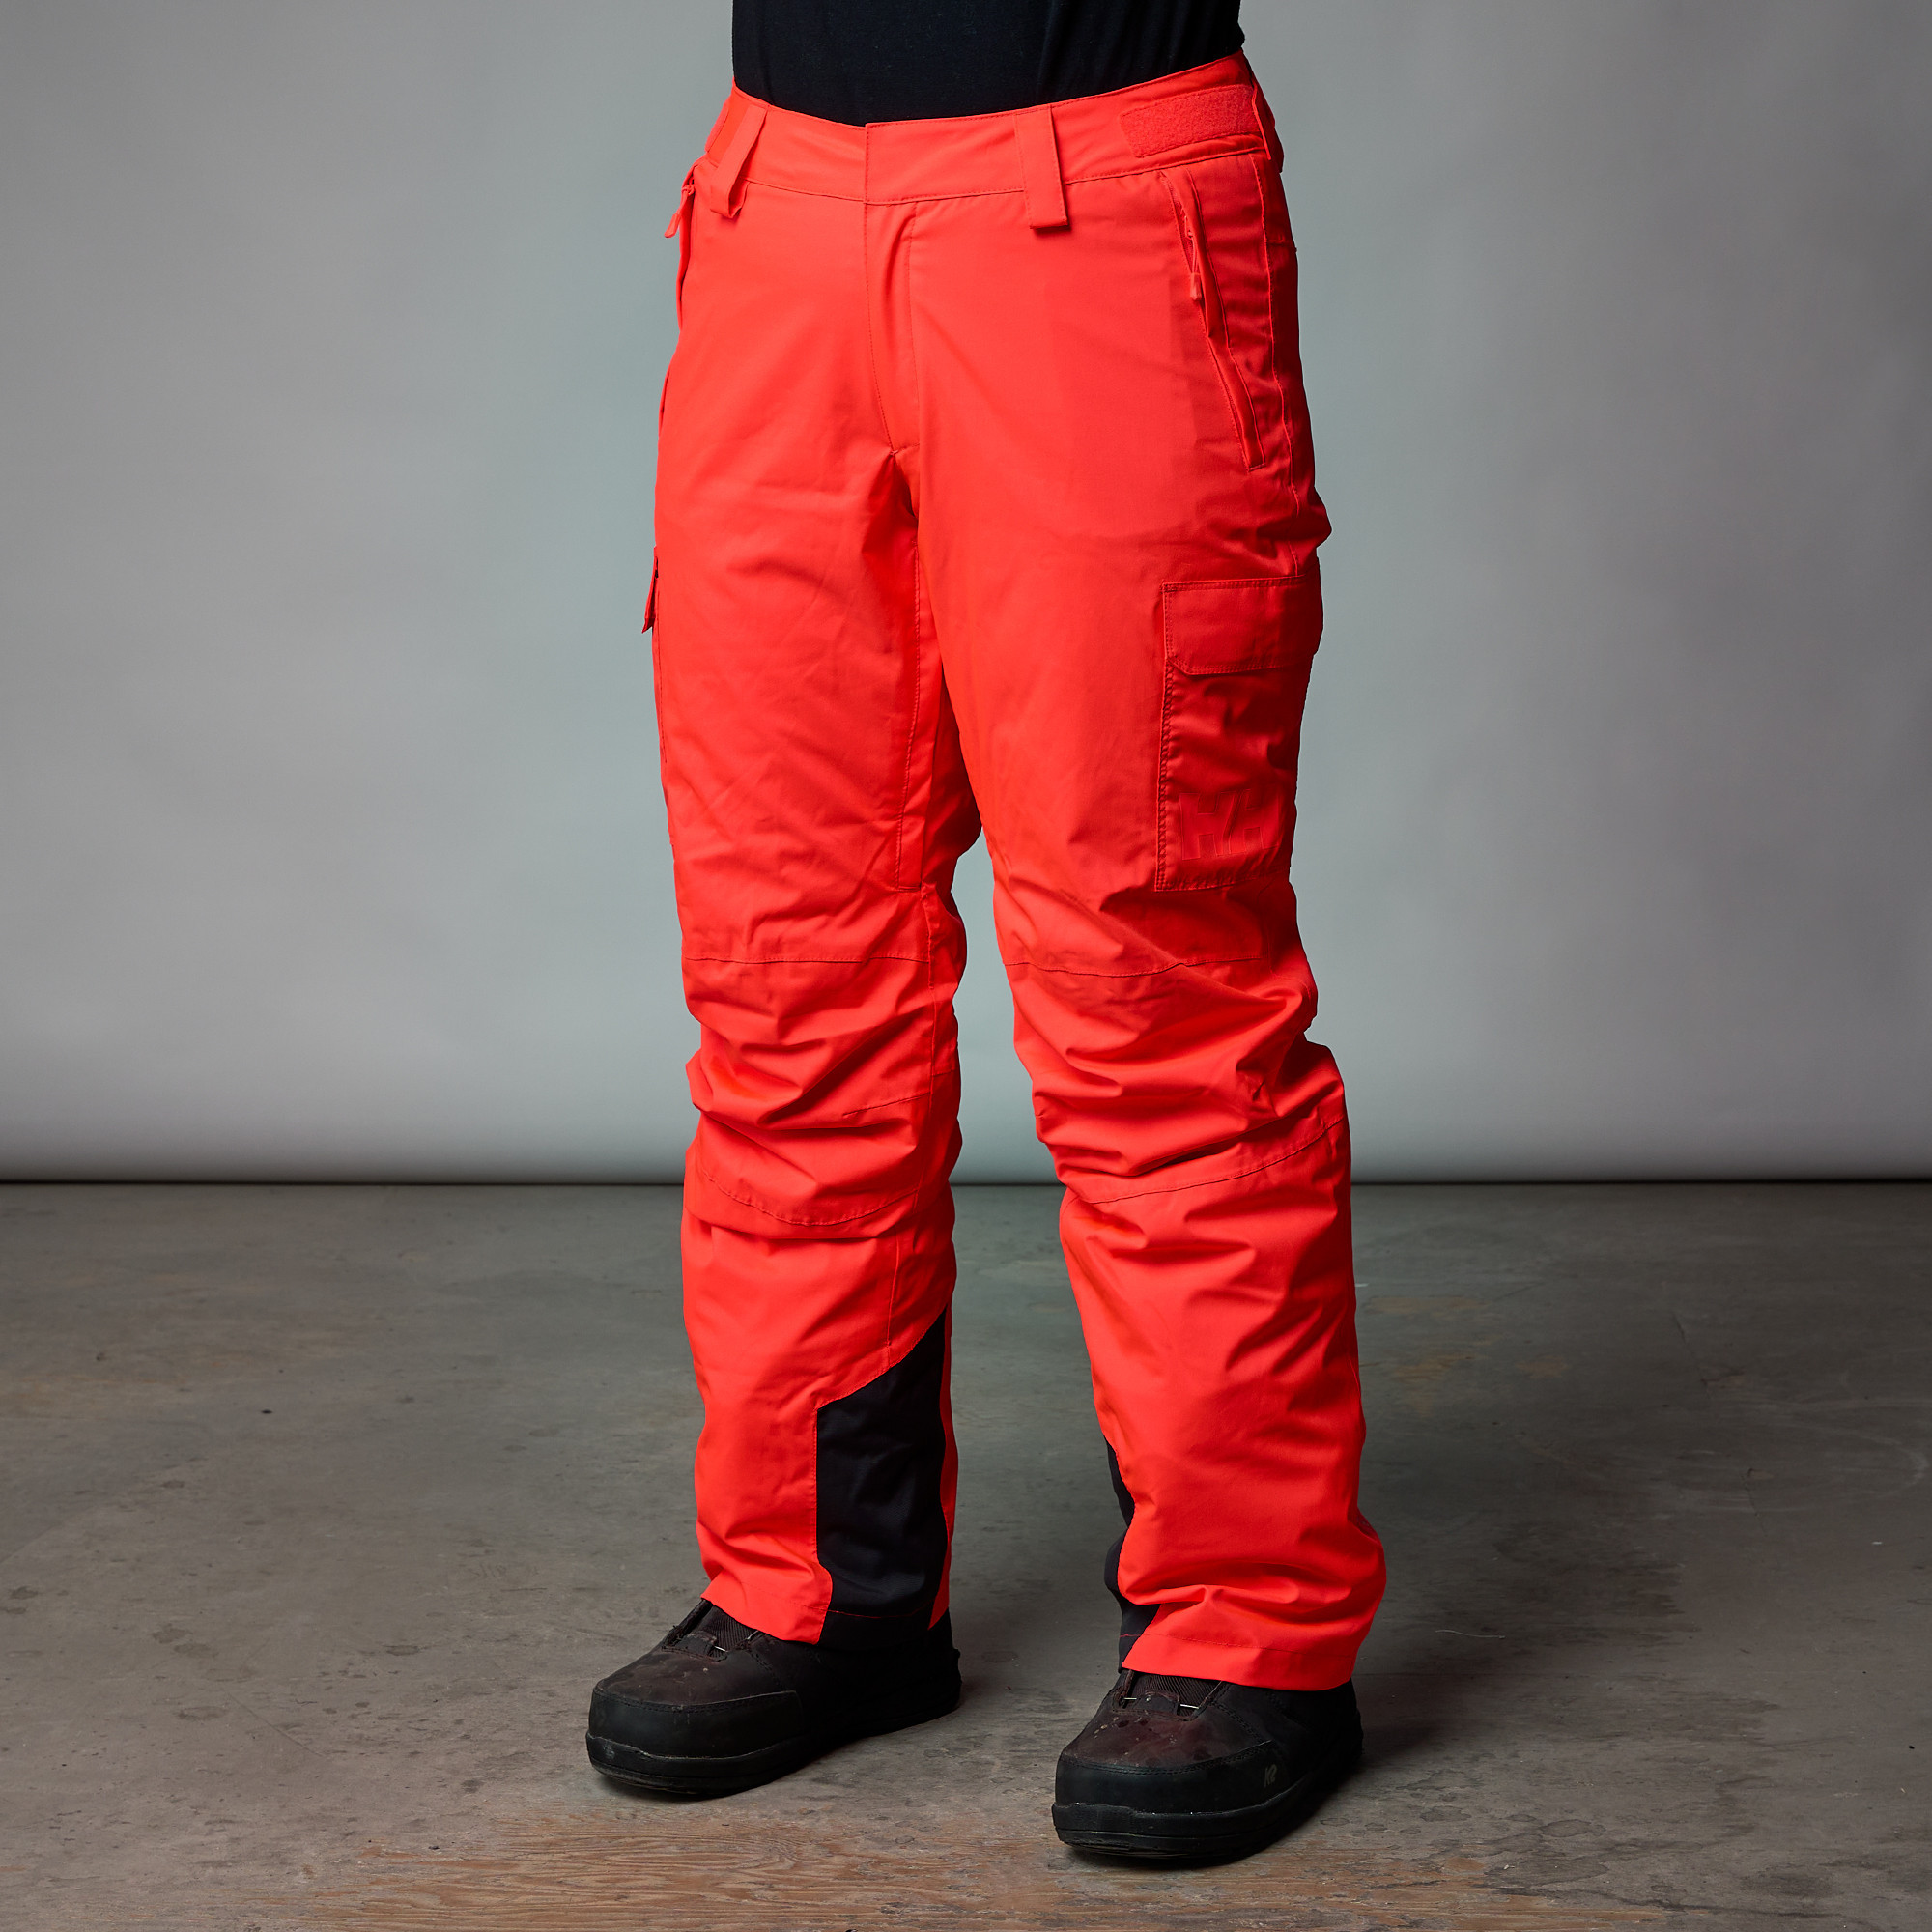 Helly Hansen Switch Cargo Insulated Pant // Women's